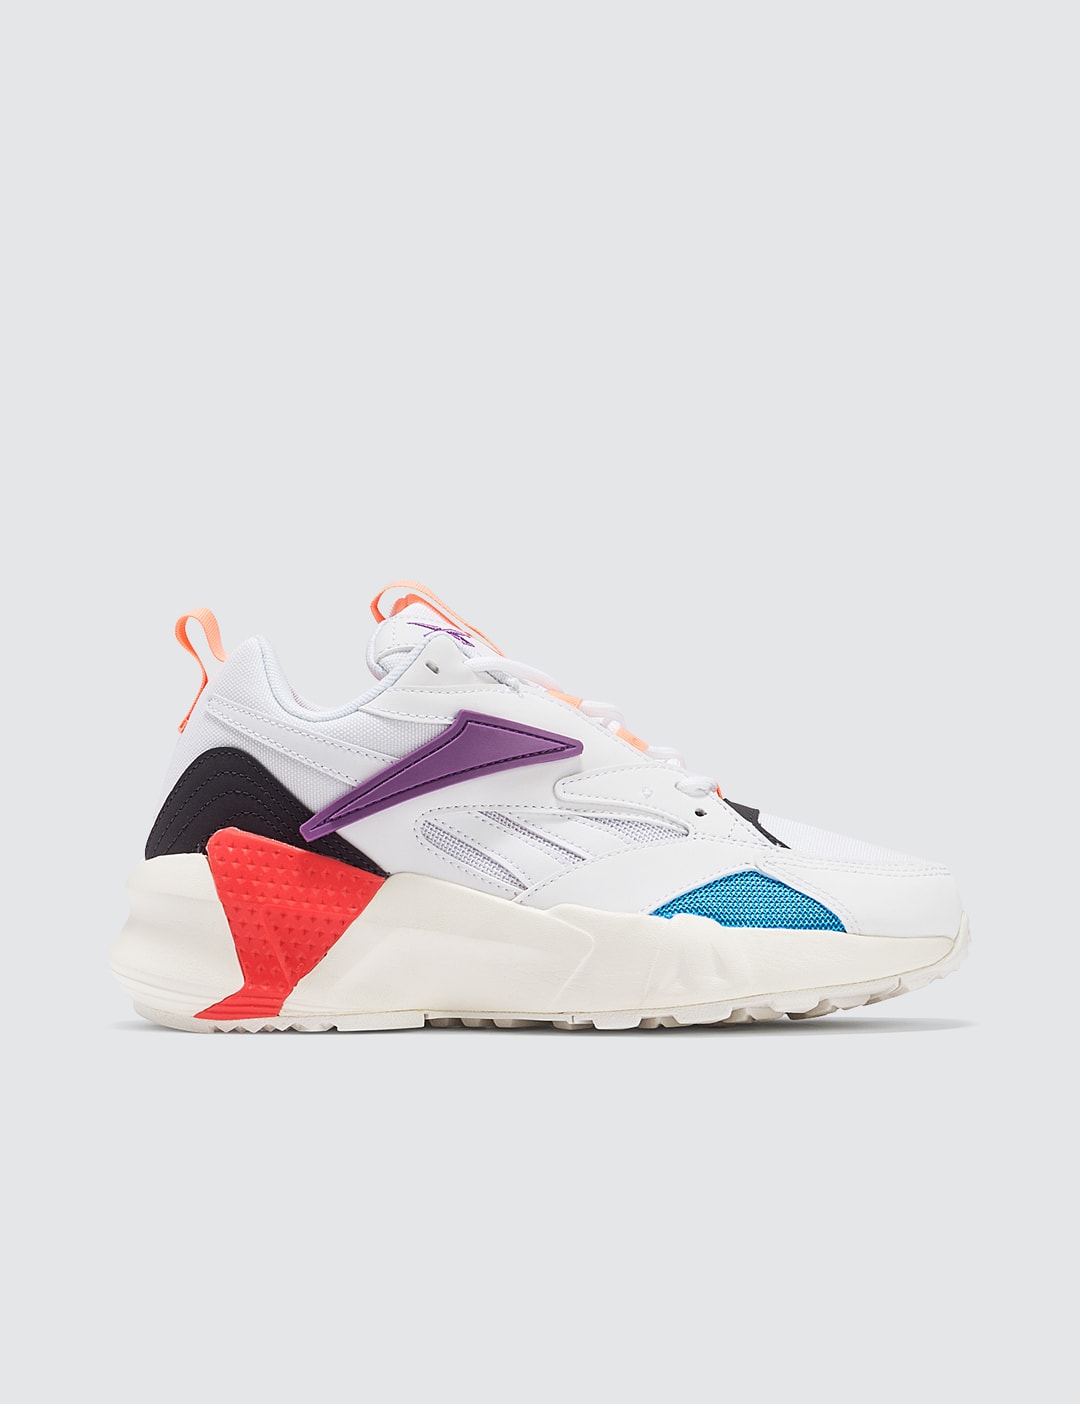 Reebok - Aztrek Double Nu Pops | HBX - Globally Curated Fashion and ...